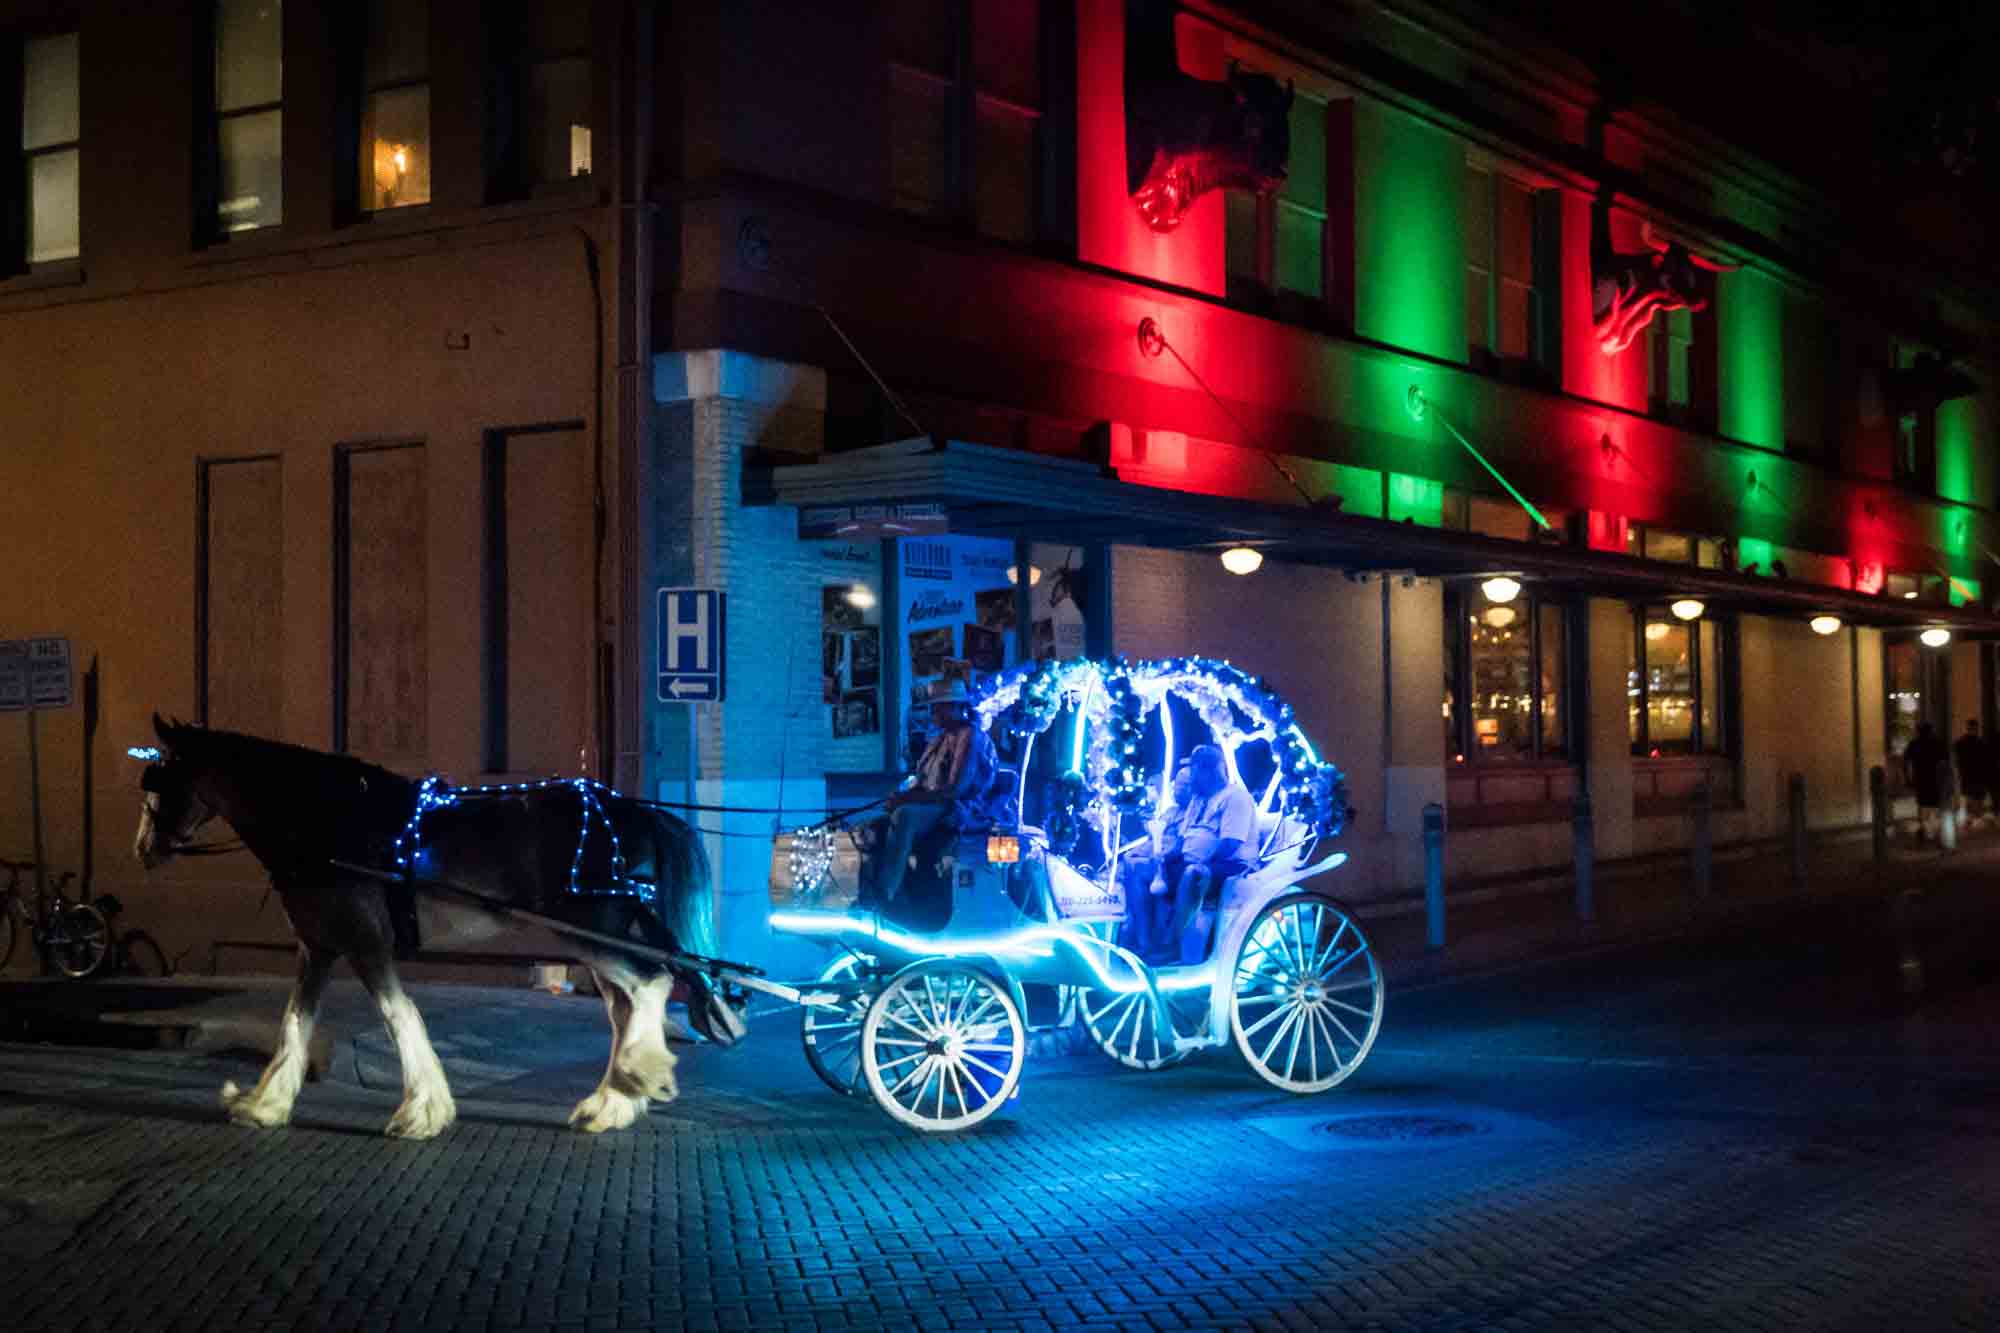 Horse carriage lit up in neon blue colors at night in San Antonio